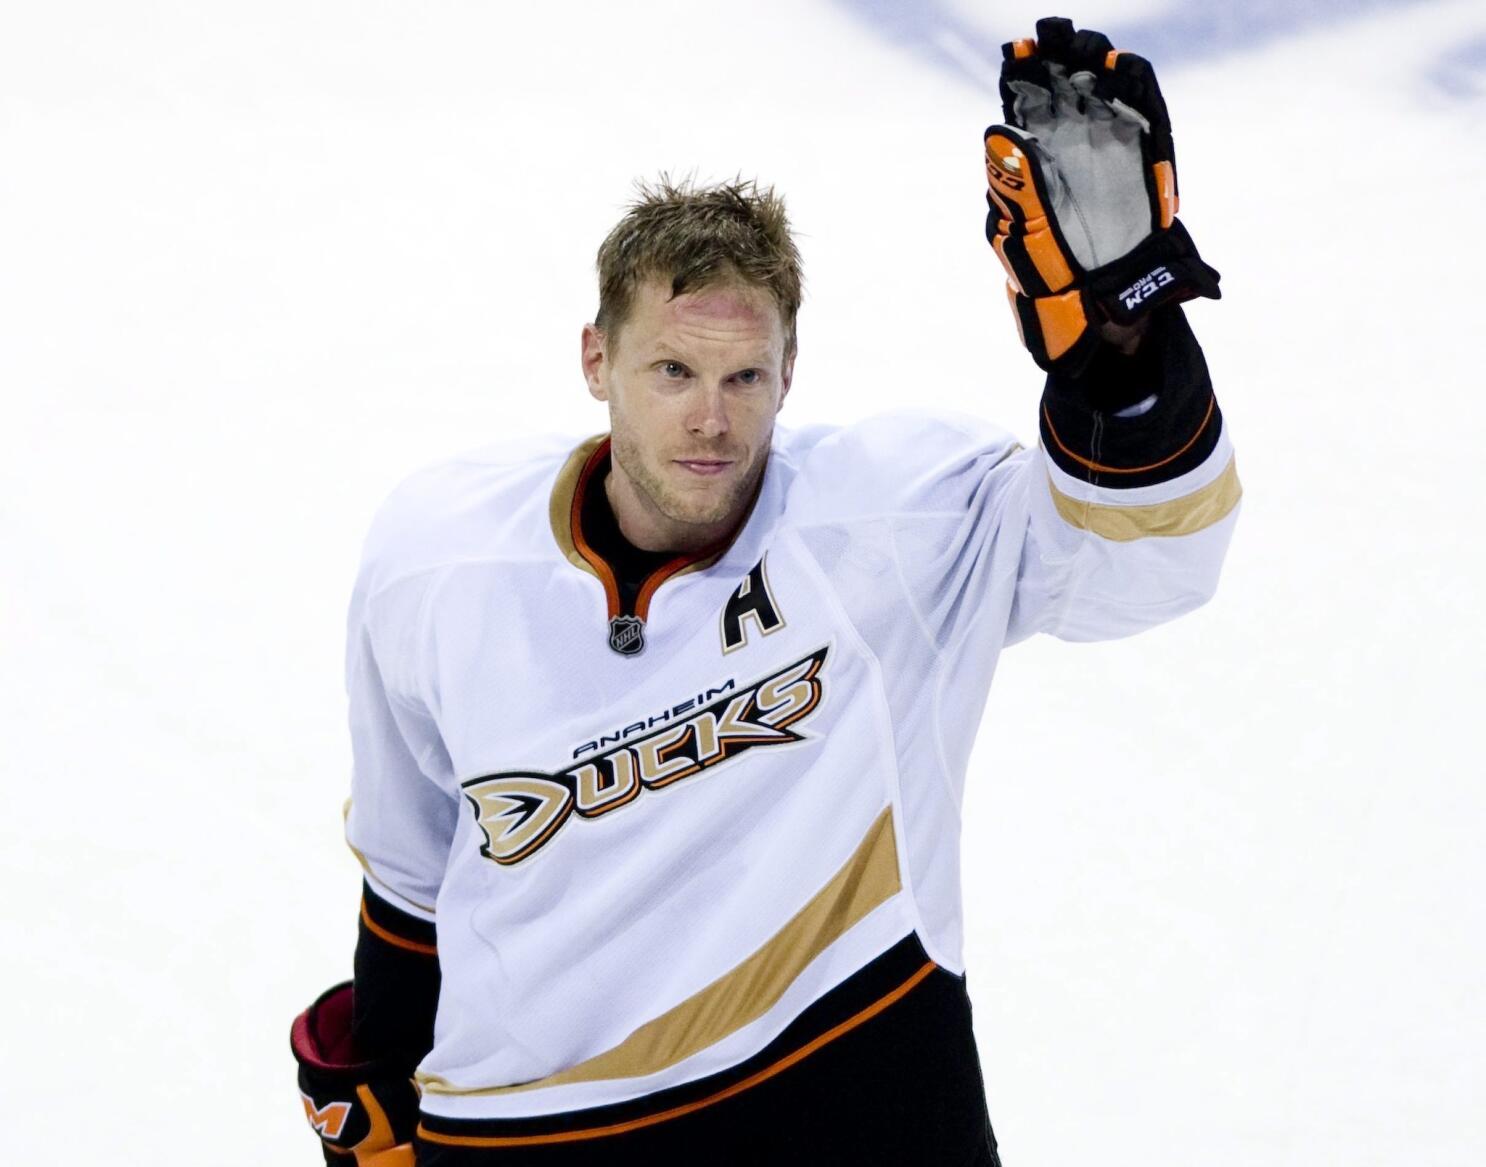 The Anaheim Ducks will retire two legendary players' numbers this